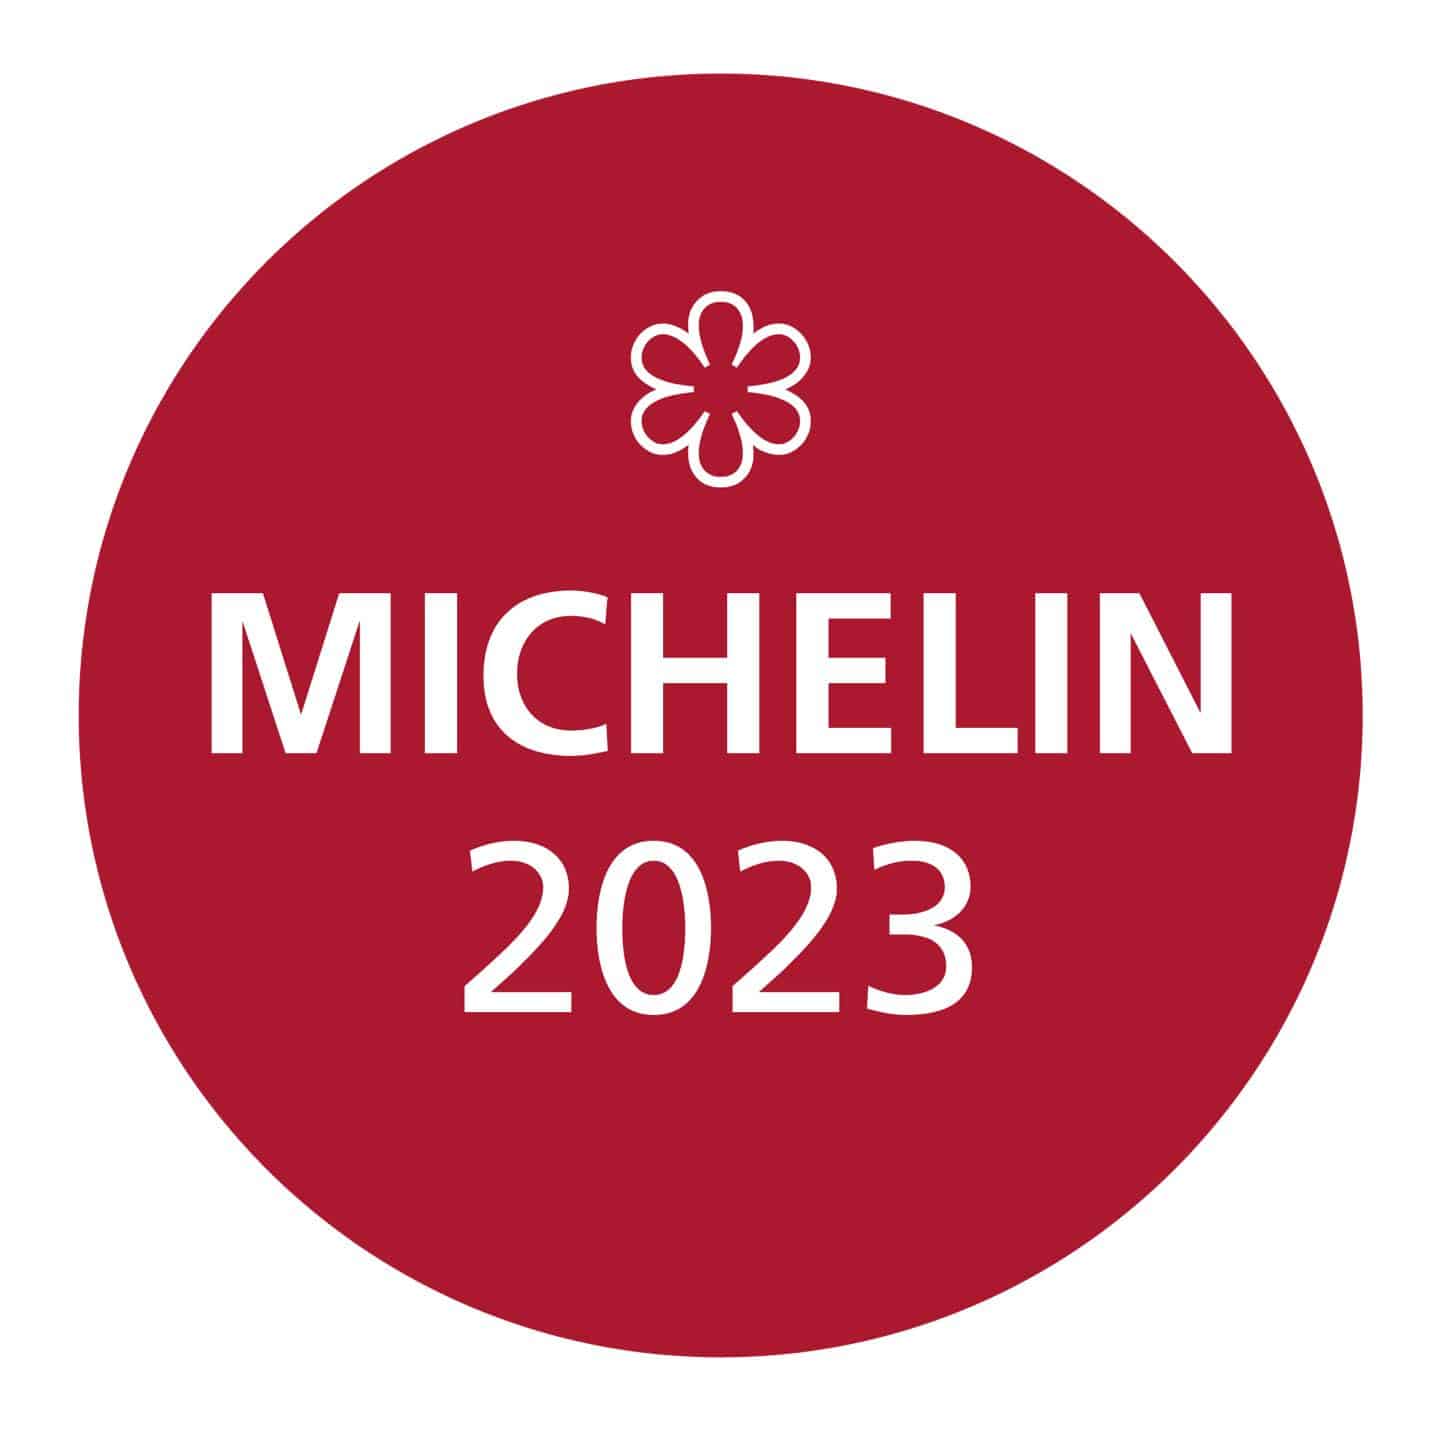 Protected: Belgrade restaurants with Michelin recommendations for 2023